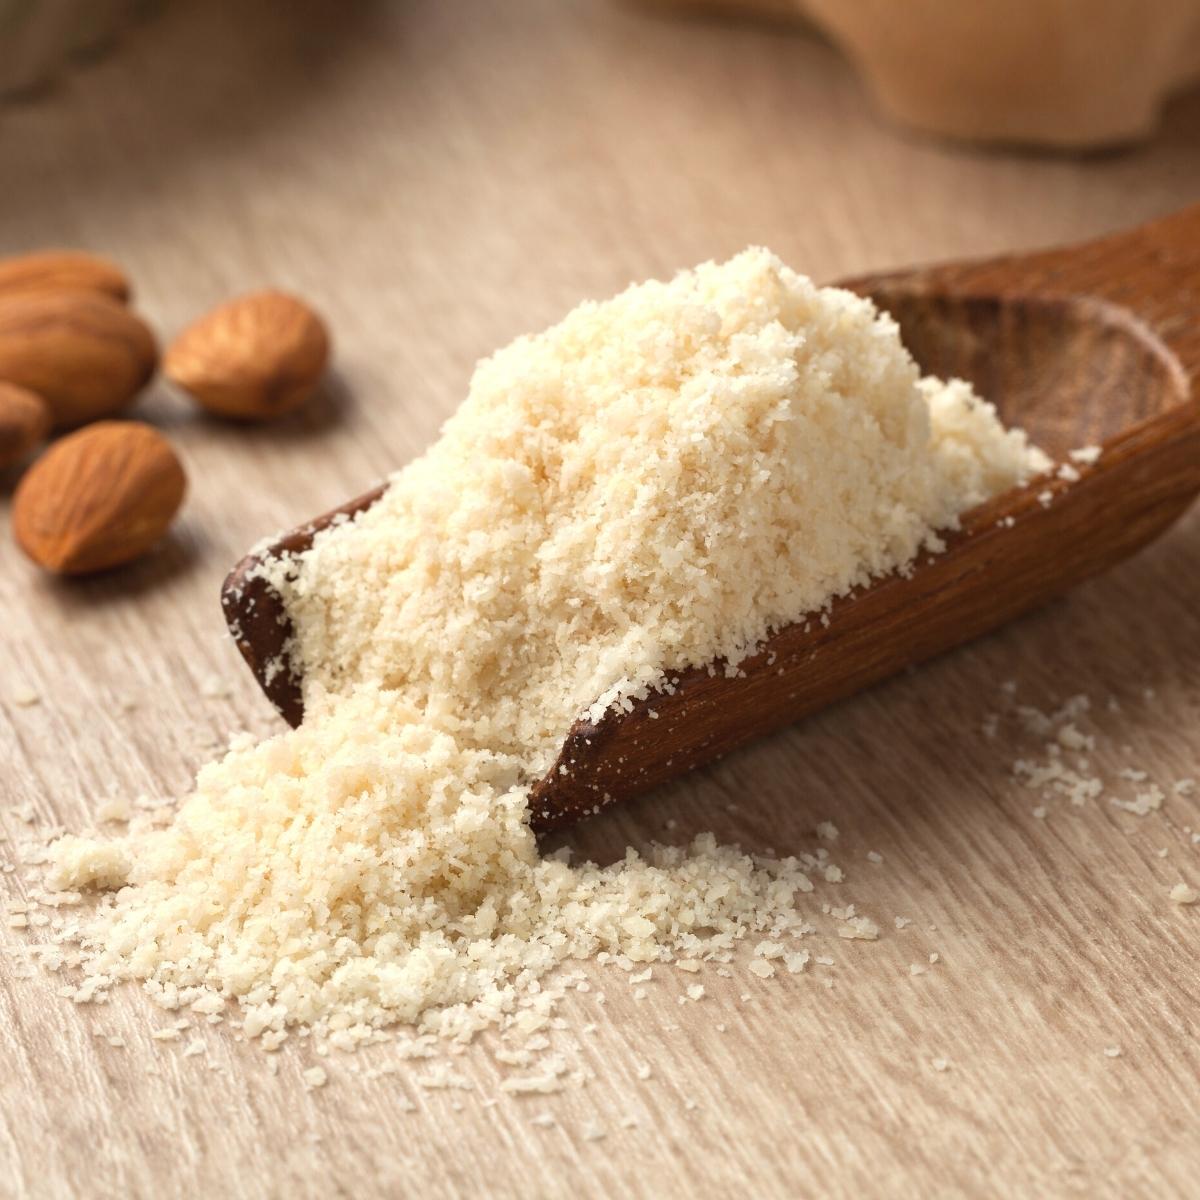 Almond meal in a measuring spoon.